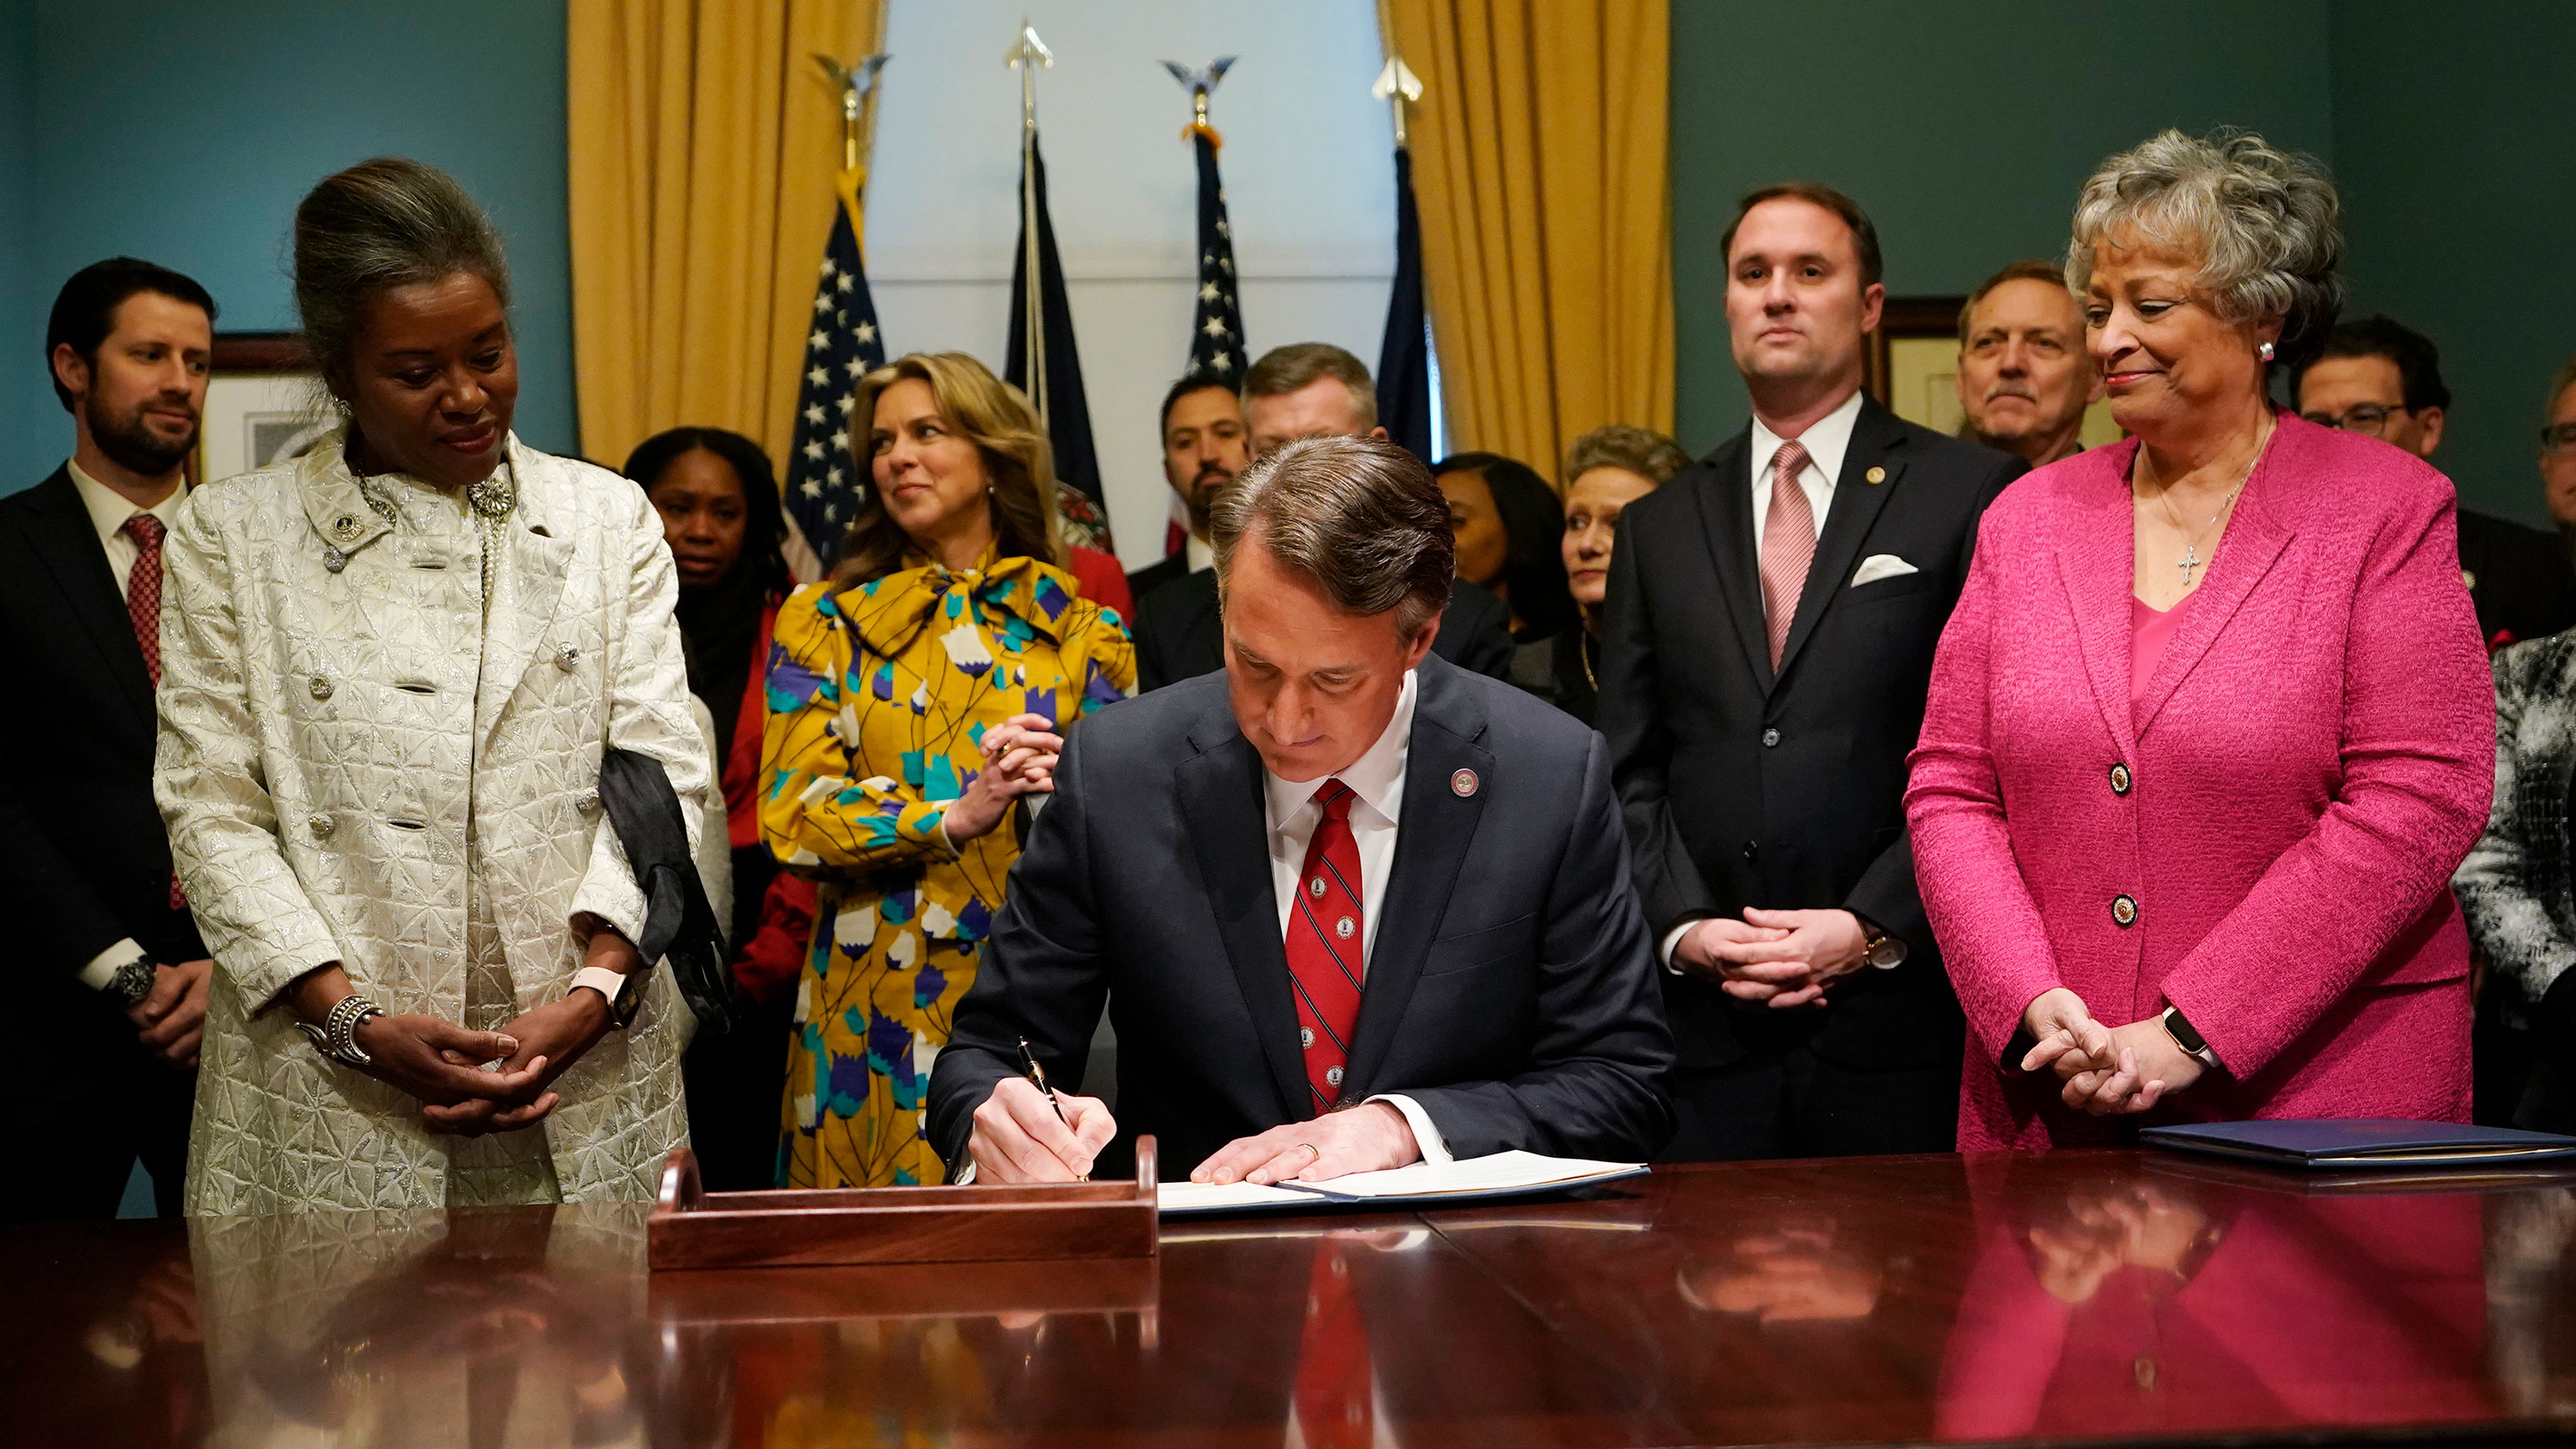 Virginia Gov. Glenn Youngkin signs executive orders in Richmond, Virginia, after being sworn in as governor on January 15.